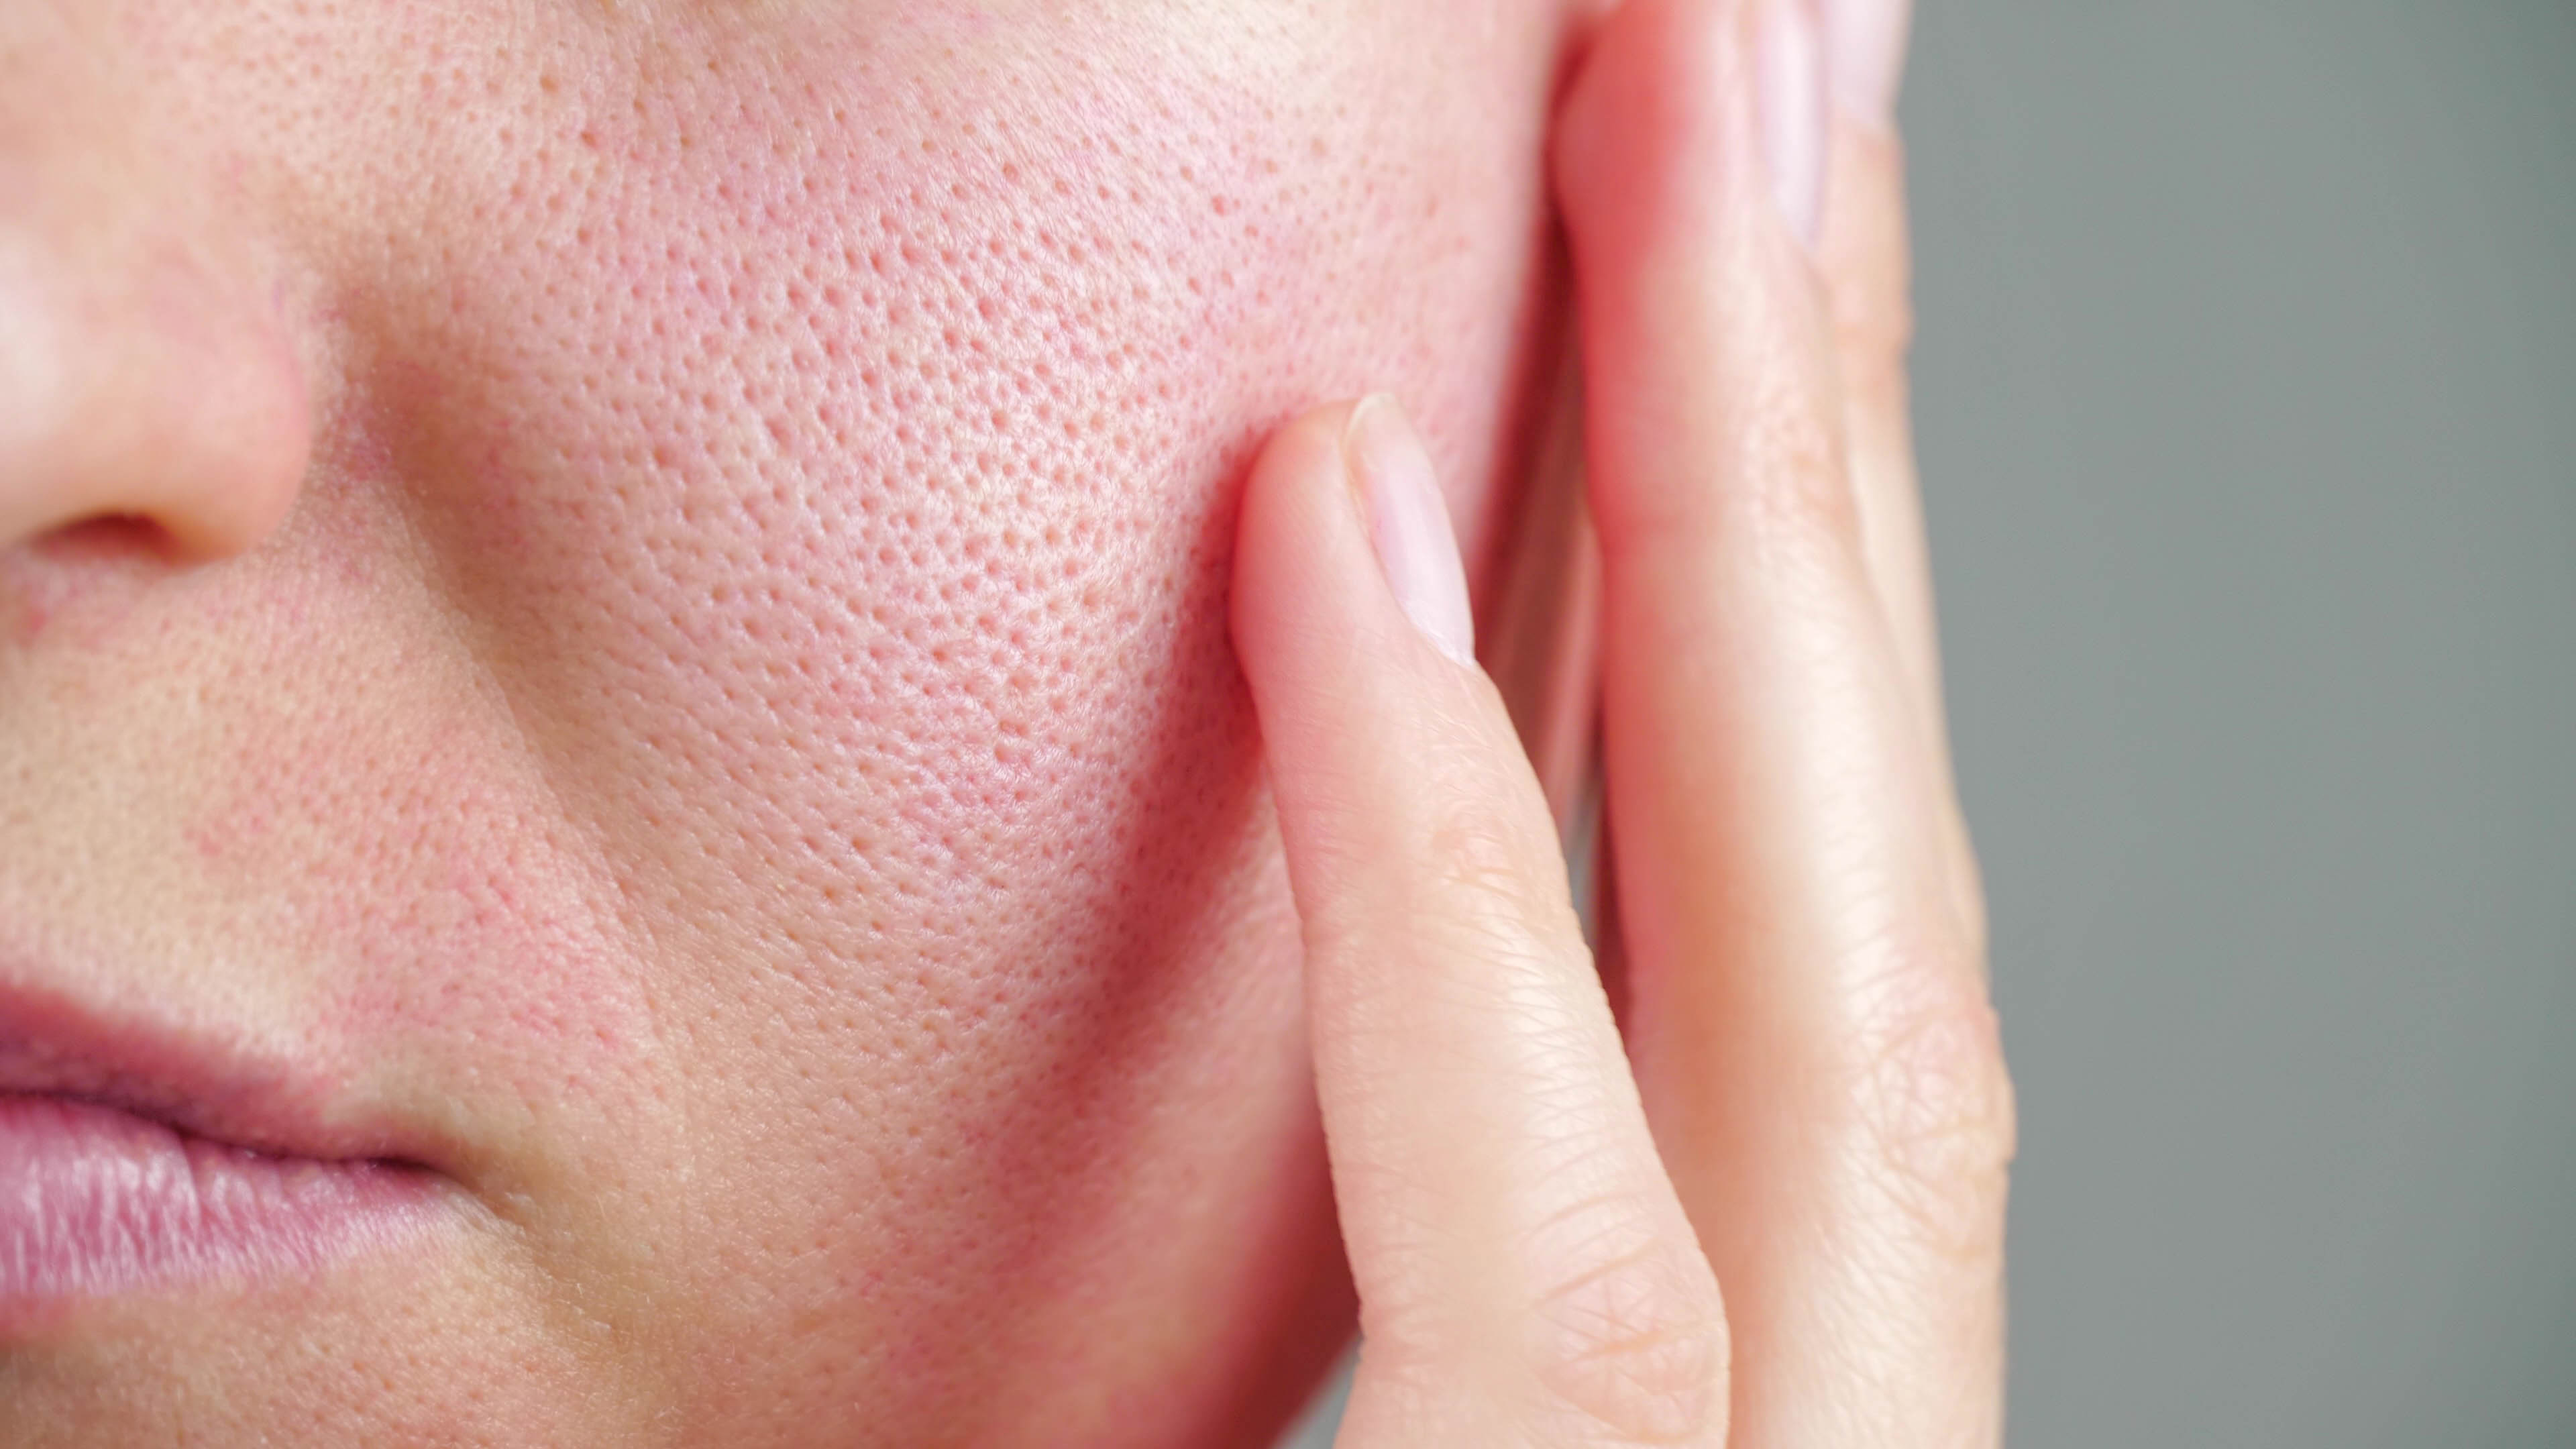 A woman with visible pores touching her cheek | Source: Shutterstock